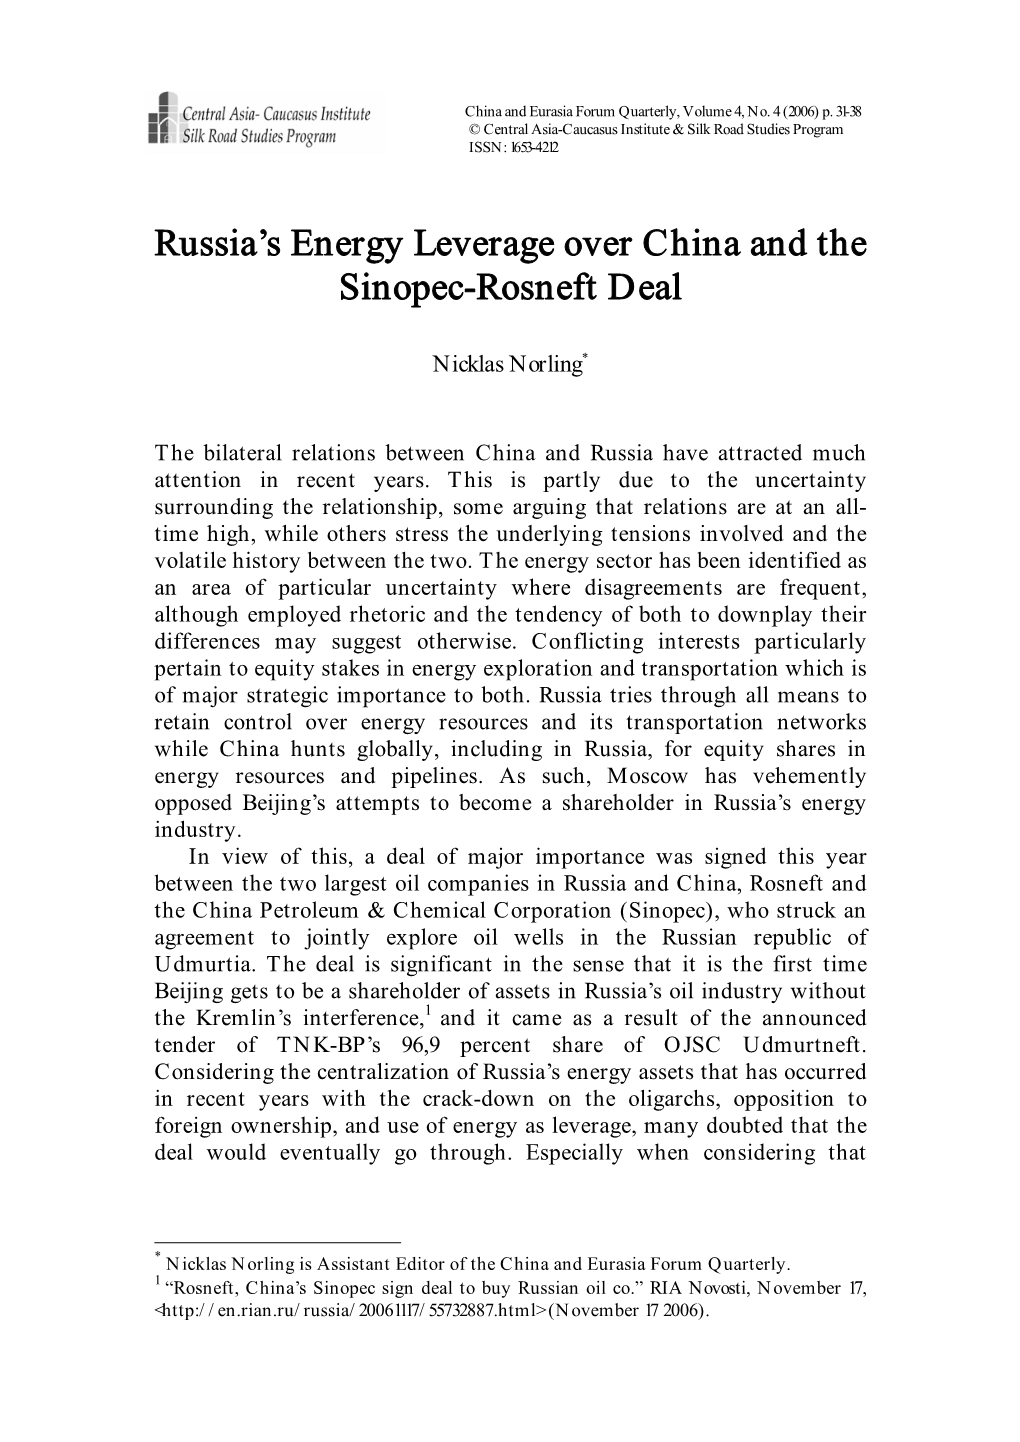 Russia's Energy Leverage Over China and the Sinopec-Rosneft Deal